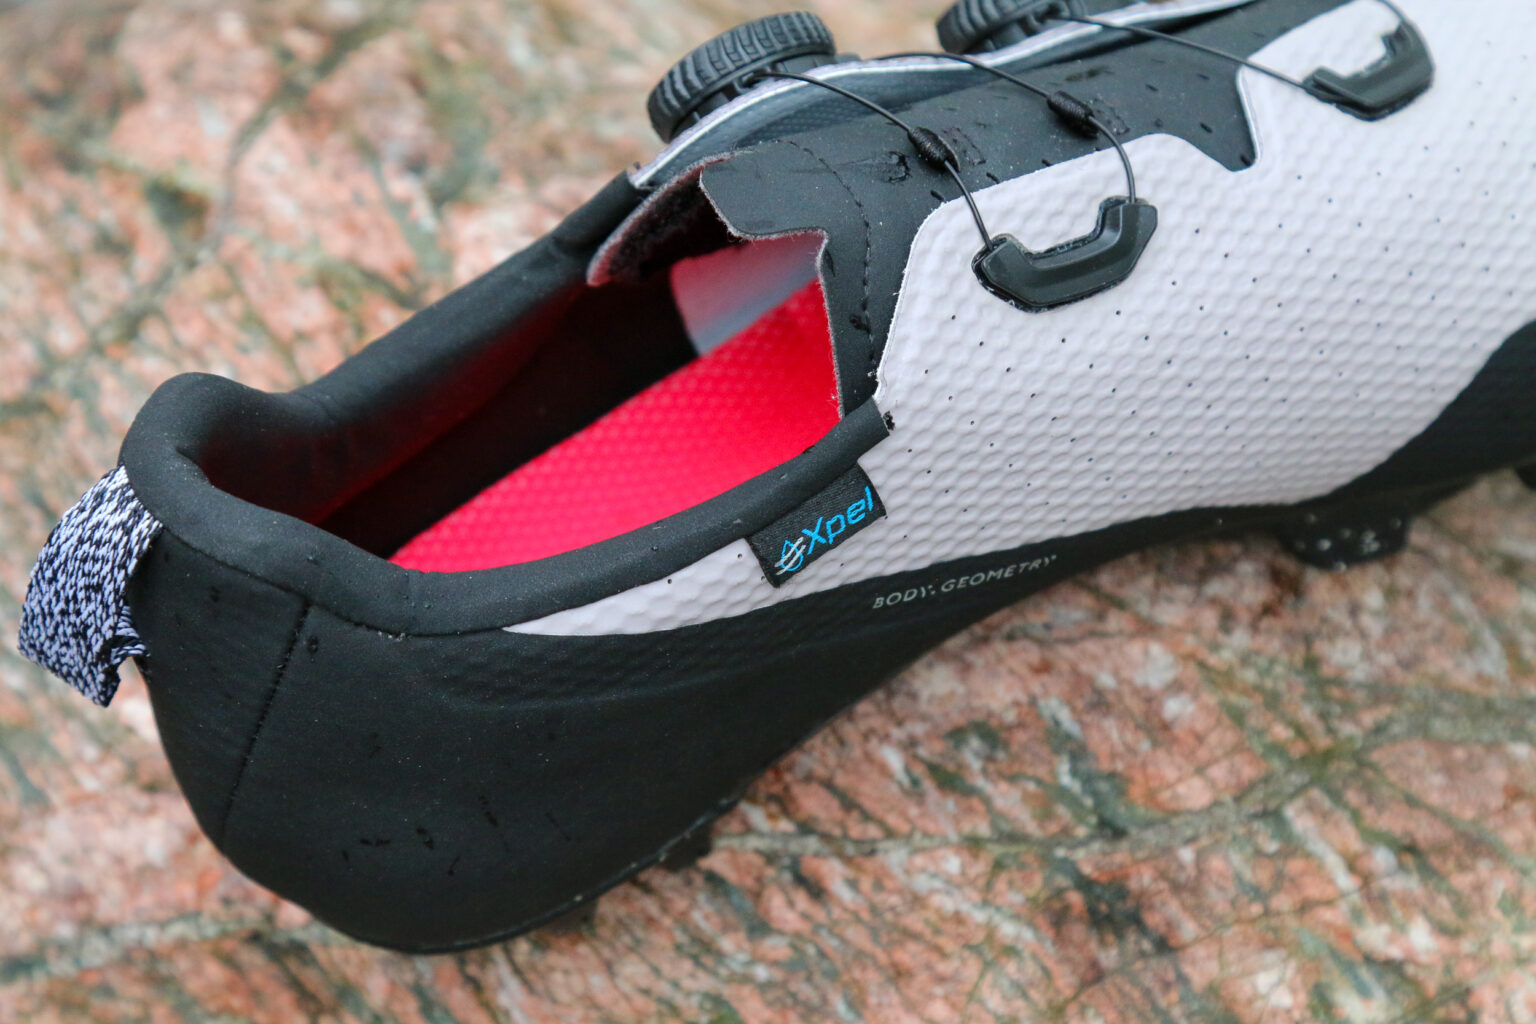 Specialized Recon gravel shoes